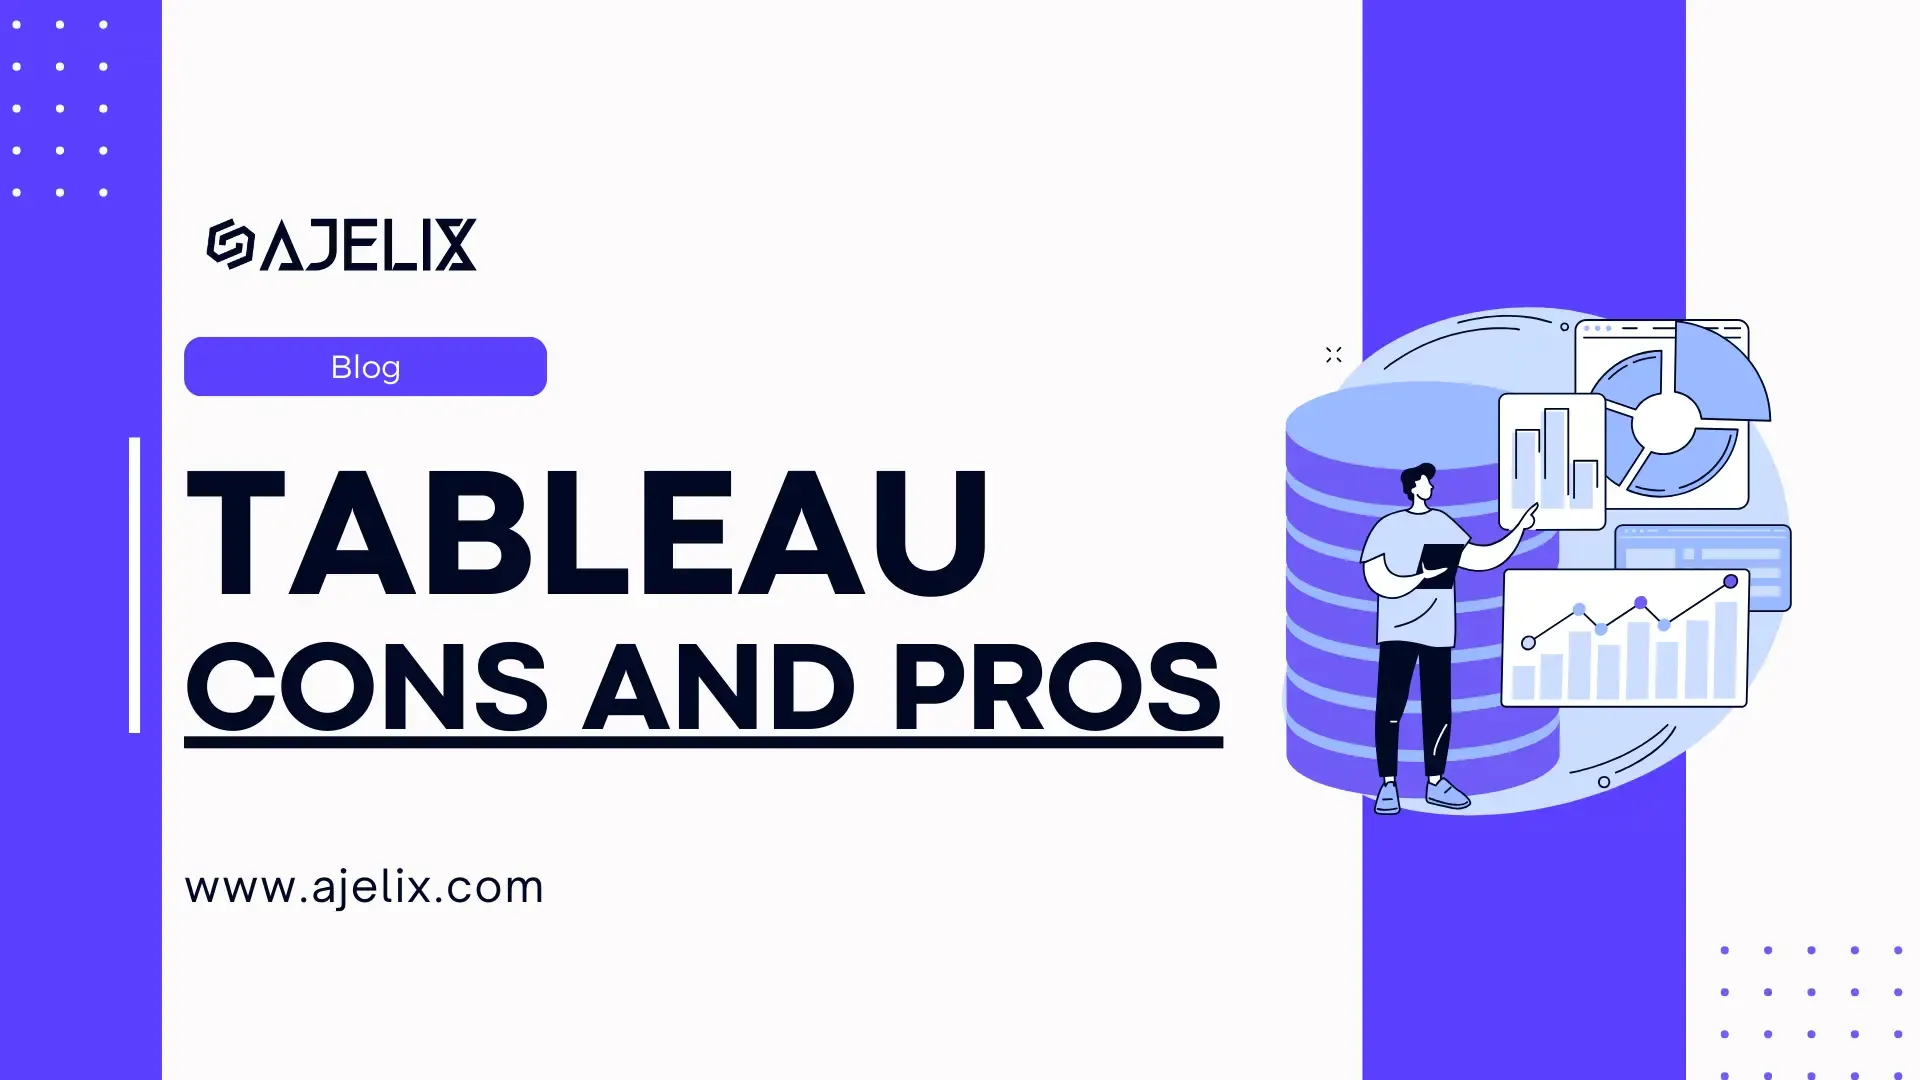 Tableau cons and pros banner article